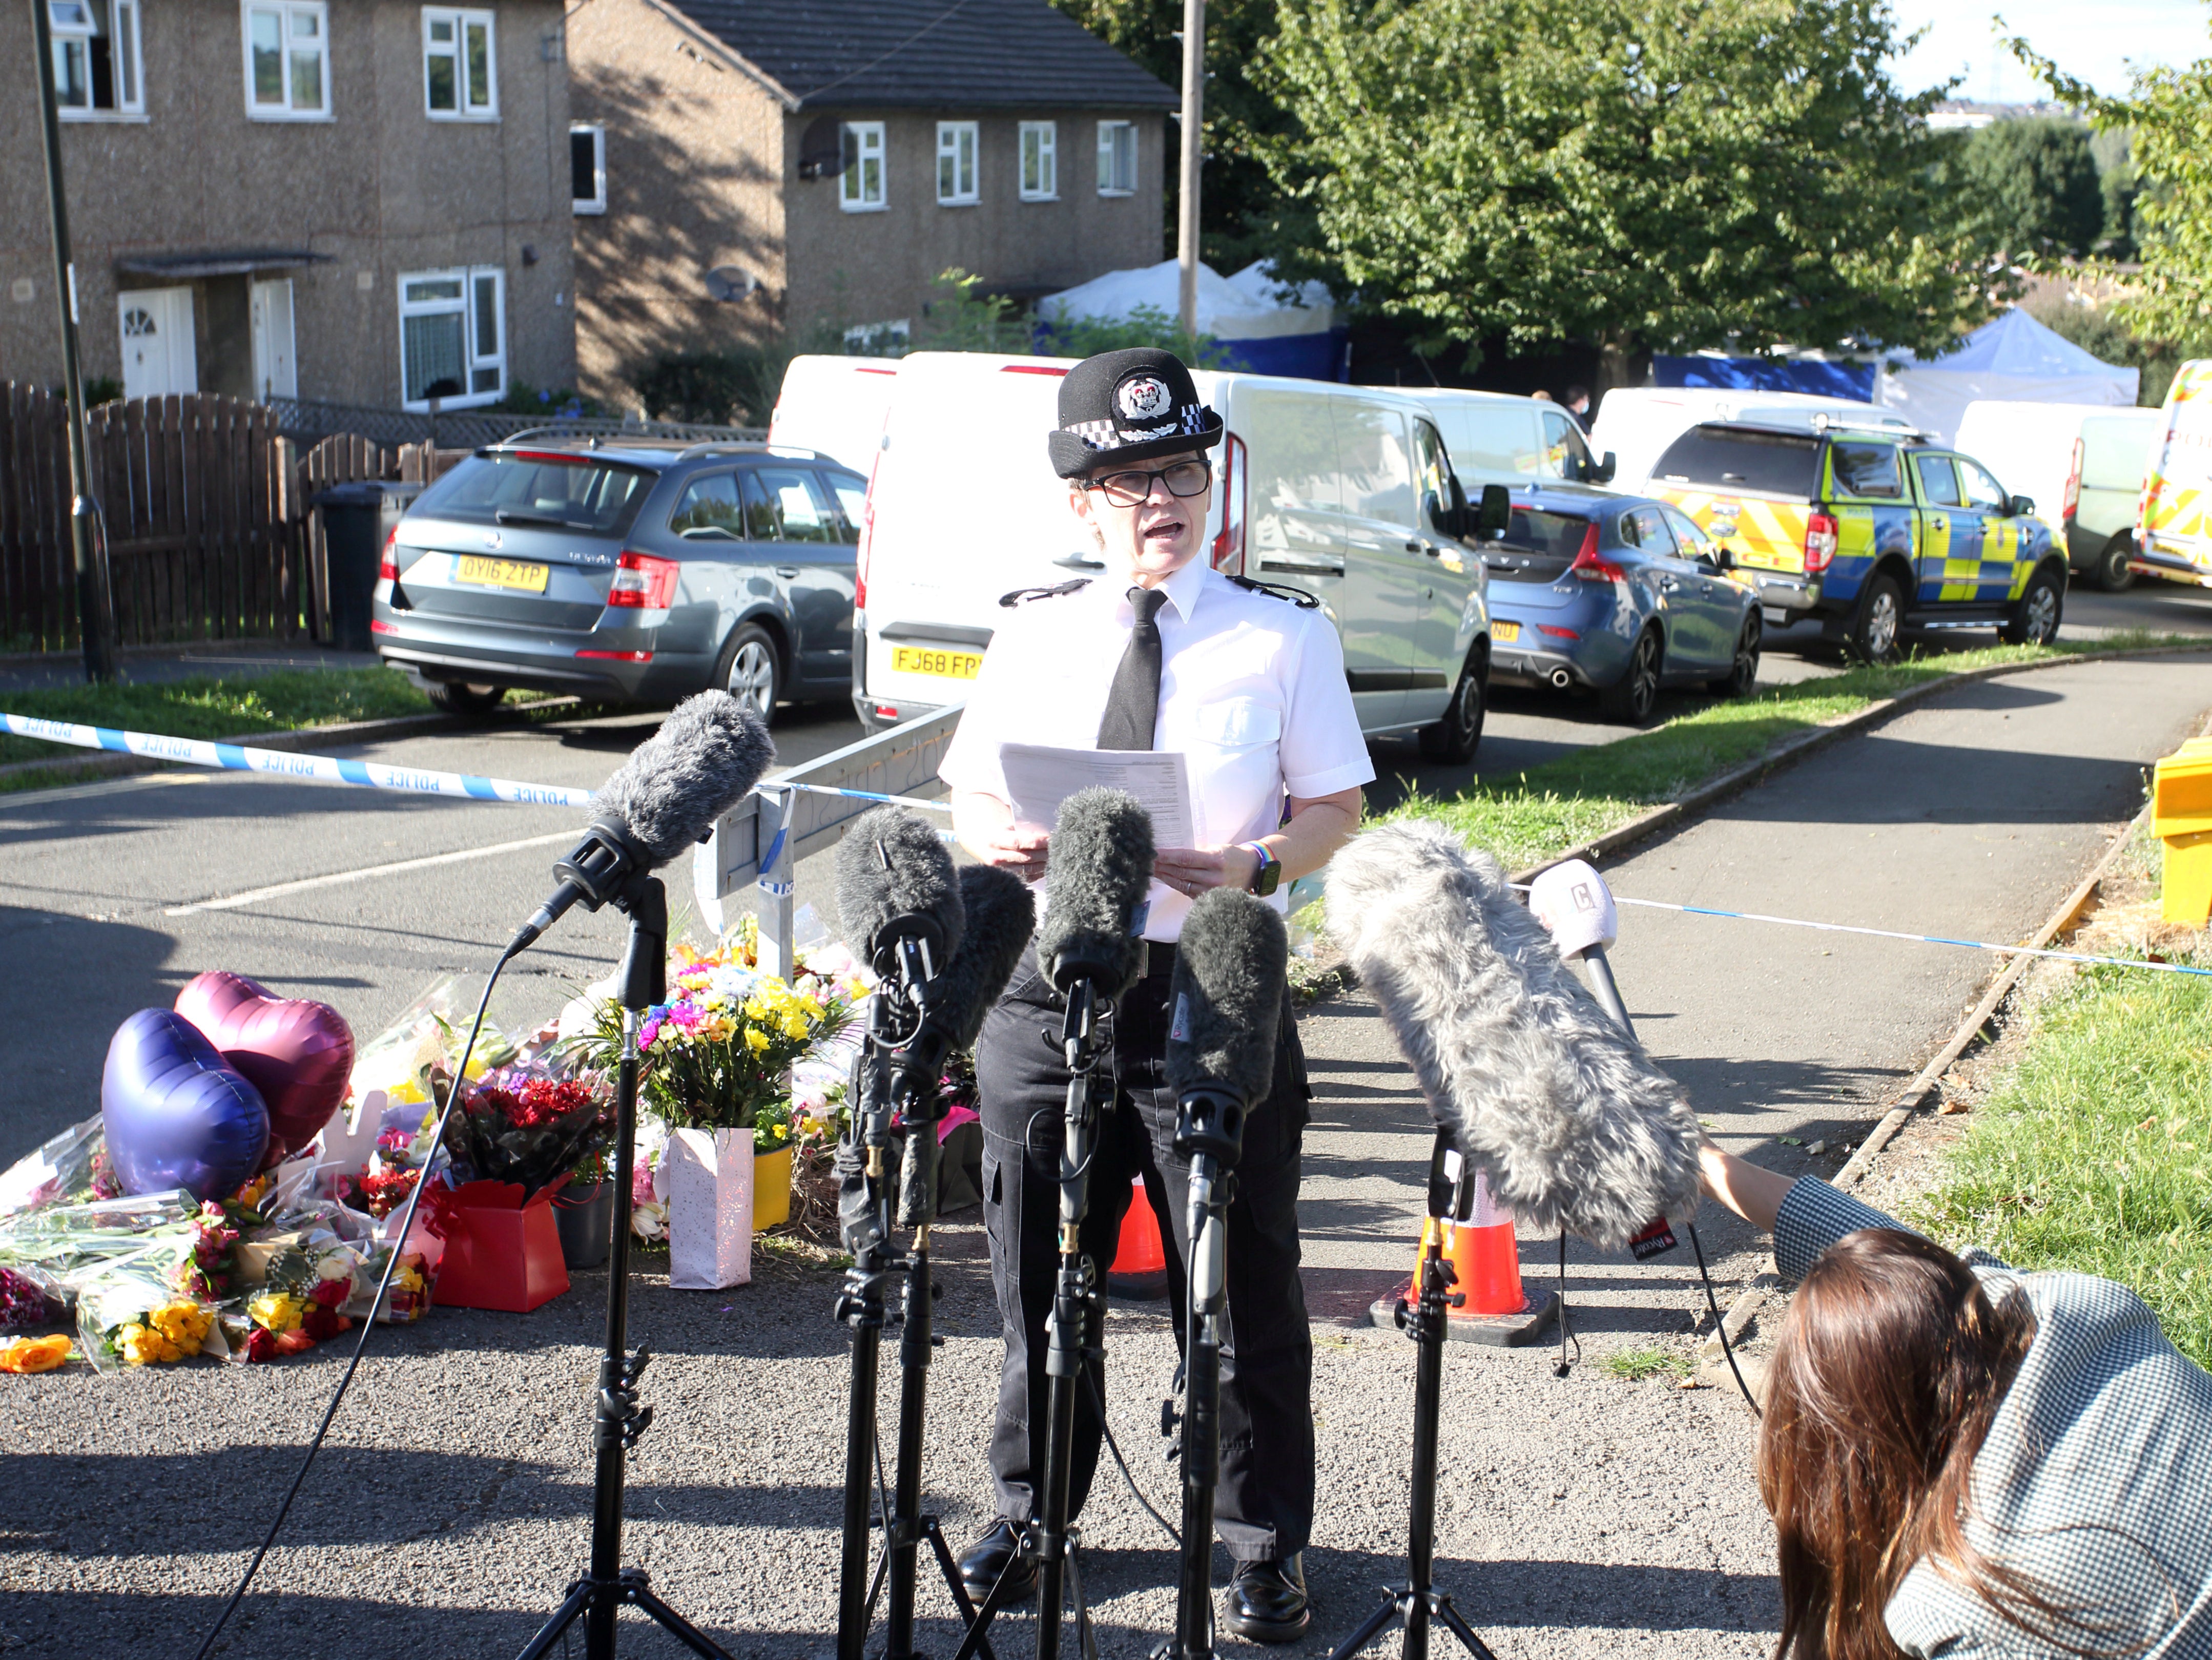 Chief Constable Rachel Swann of Derbyshire Police talks to the media at the murder scene